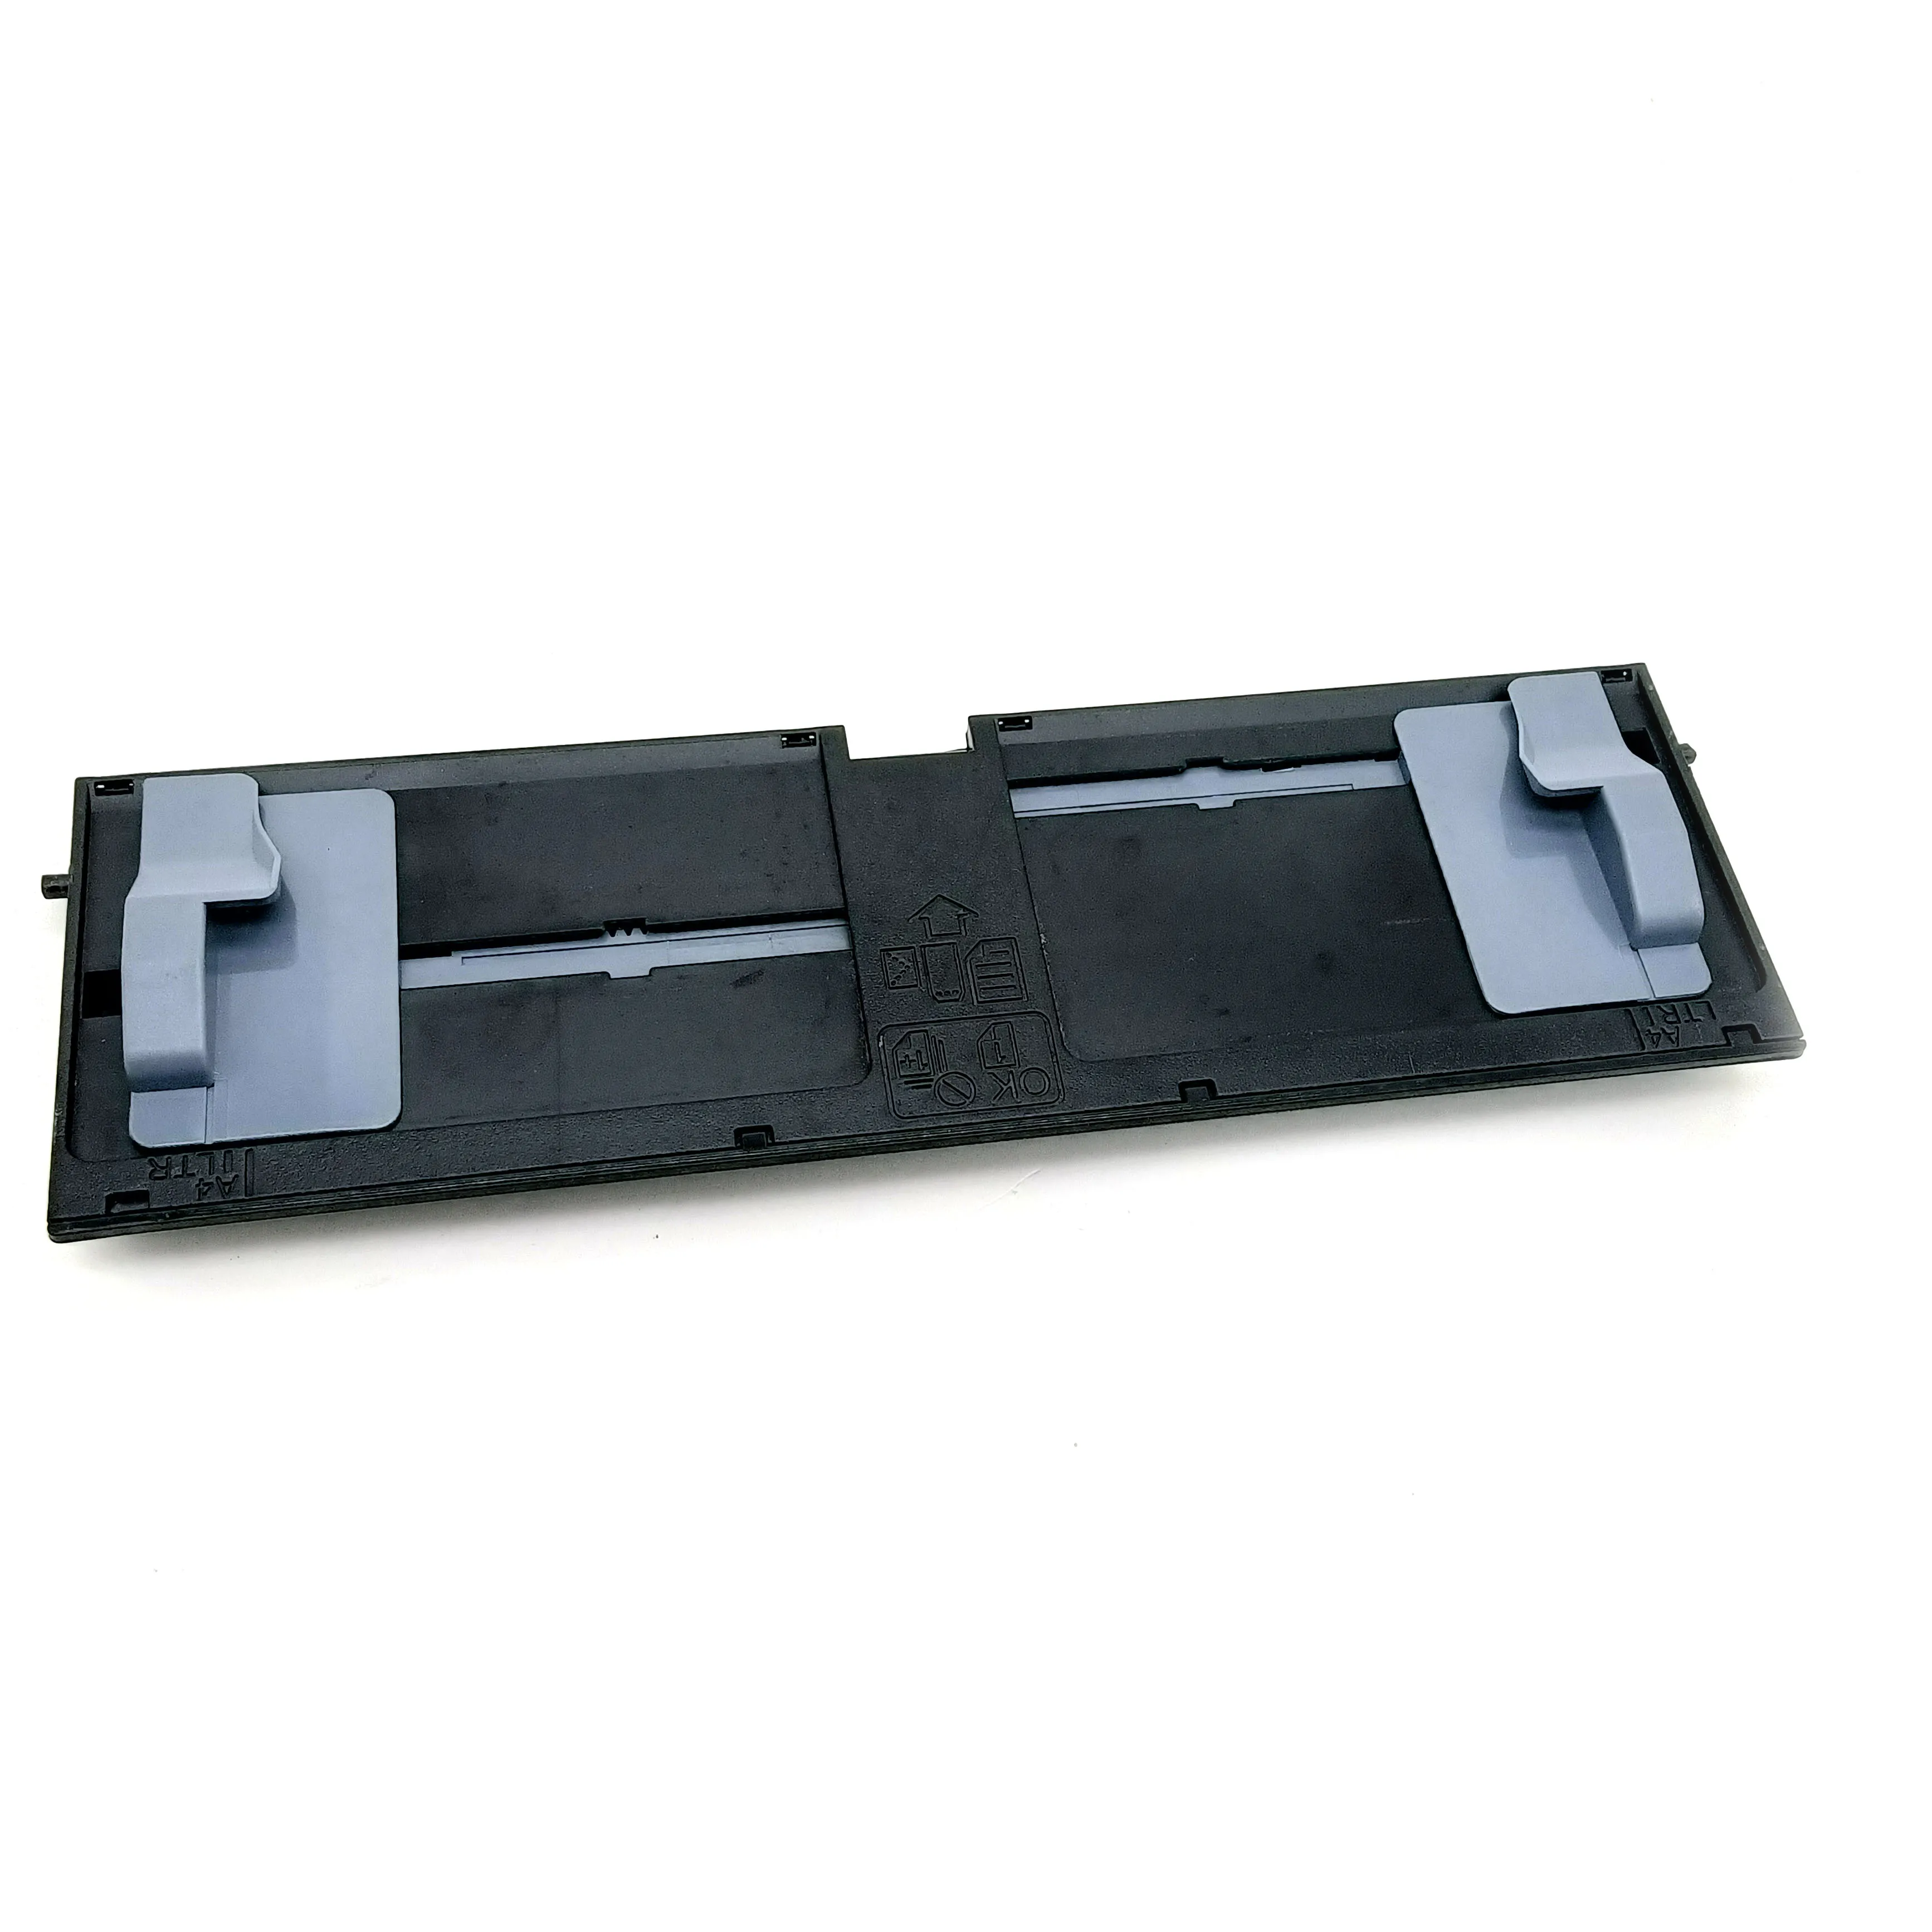 

Paper Feed Baffle WF-3640 Fits For Epson 3621 3720 3725 2530 3641 3721 3730 L655 2531 3620